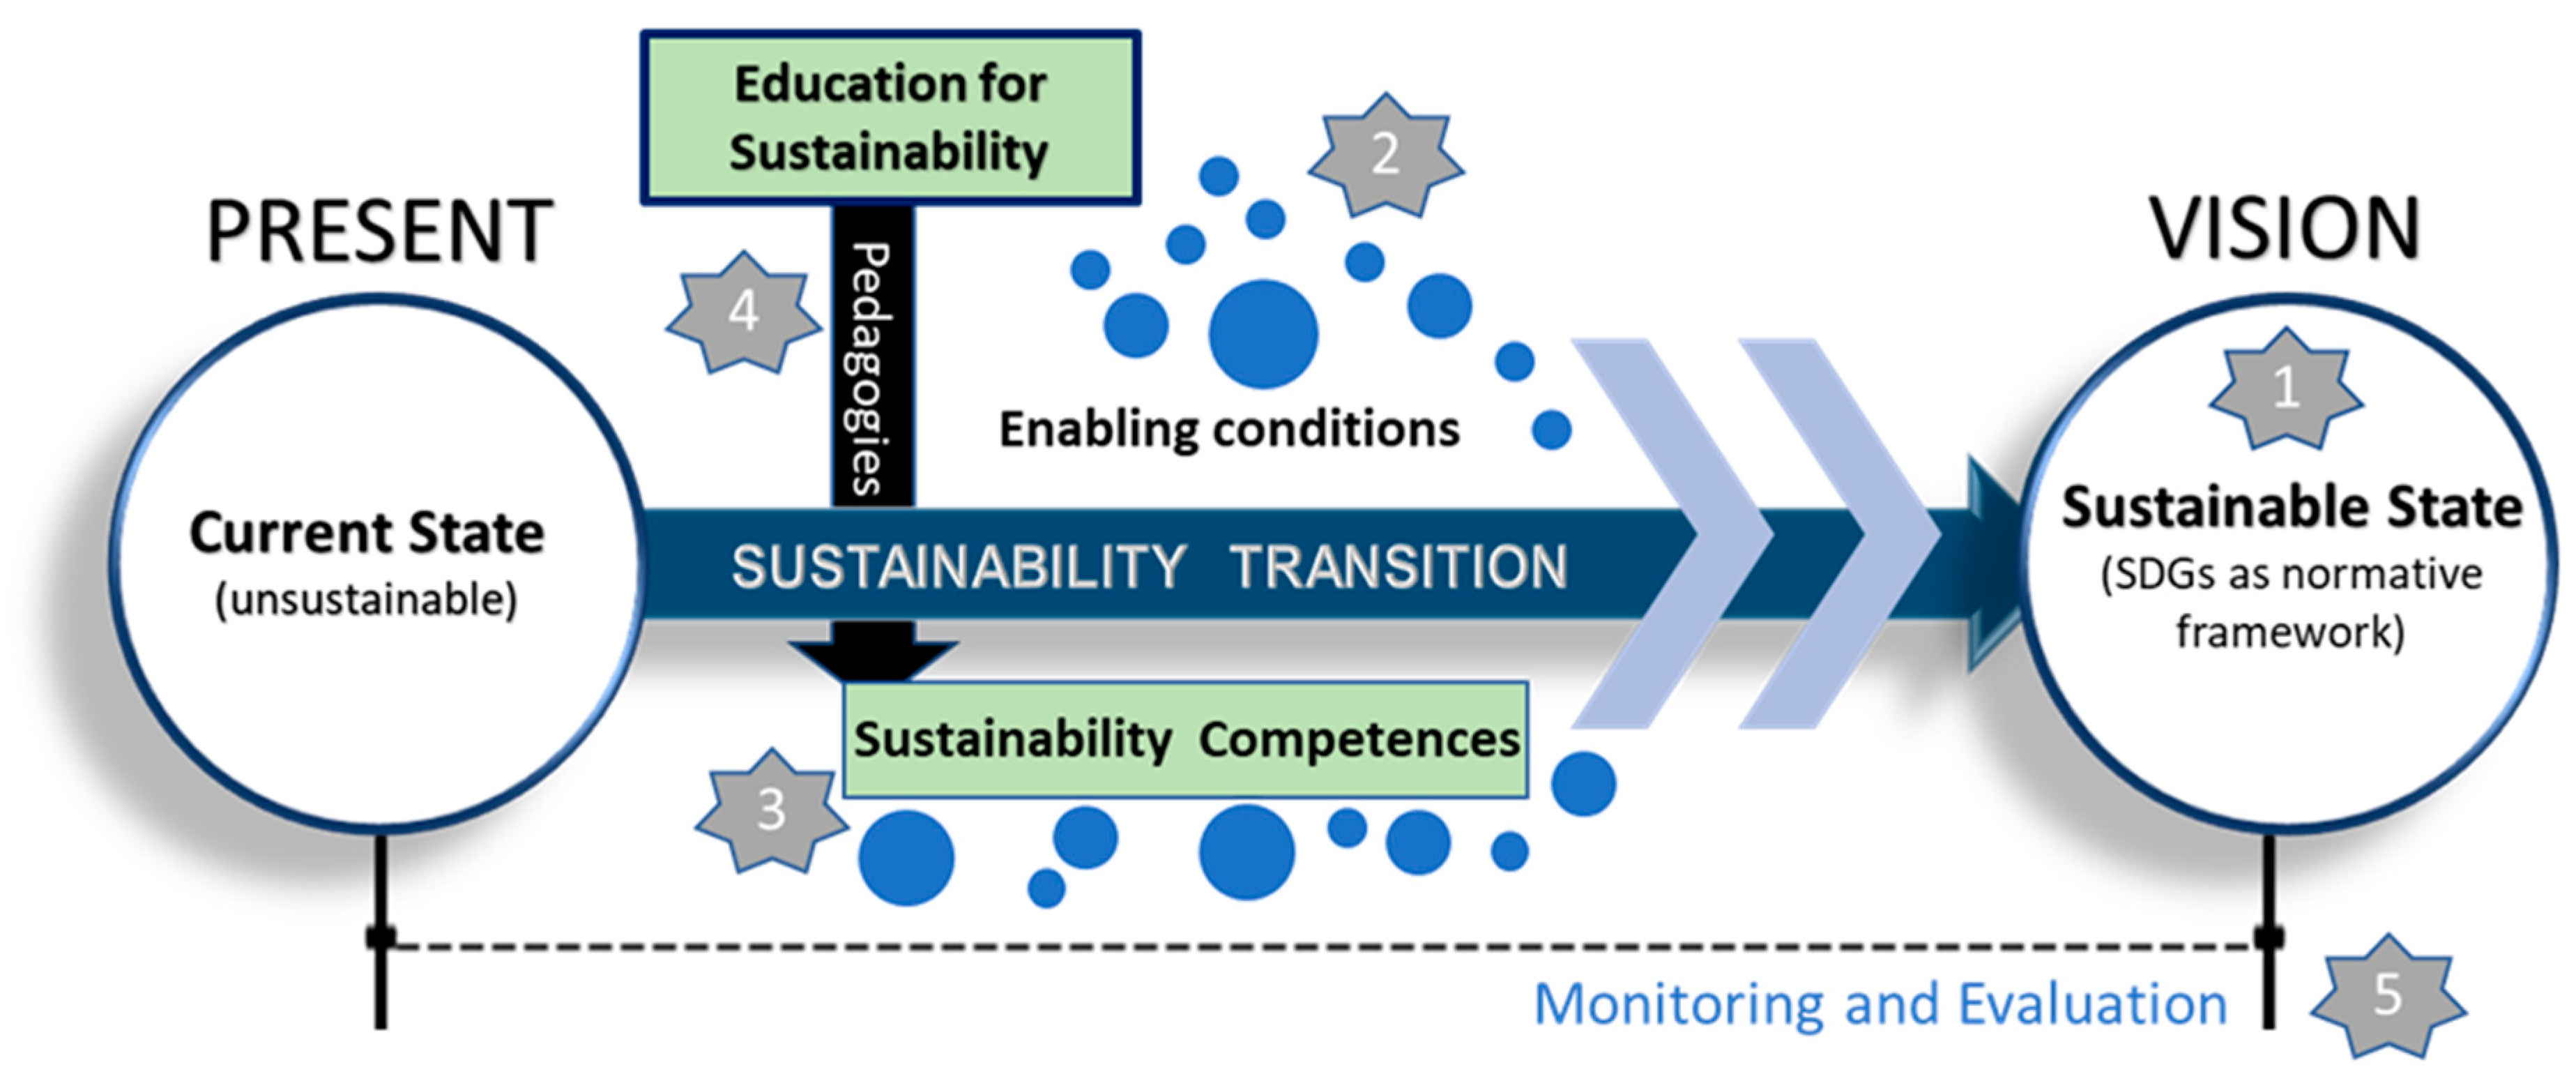 sustainability funding in higher education a literature based review